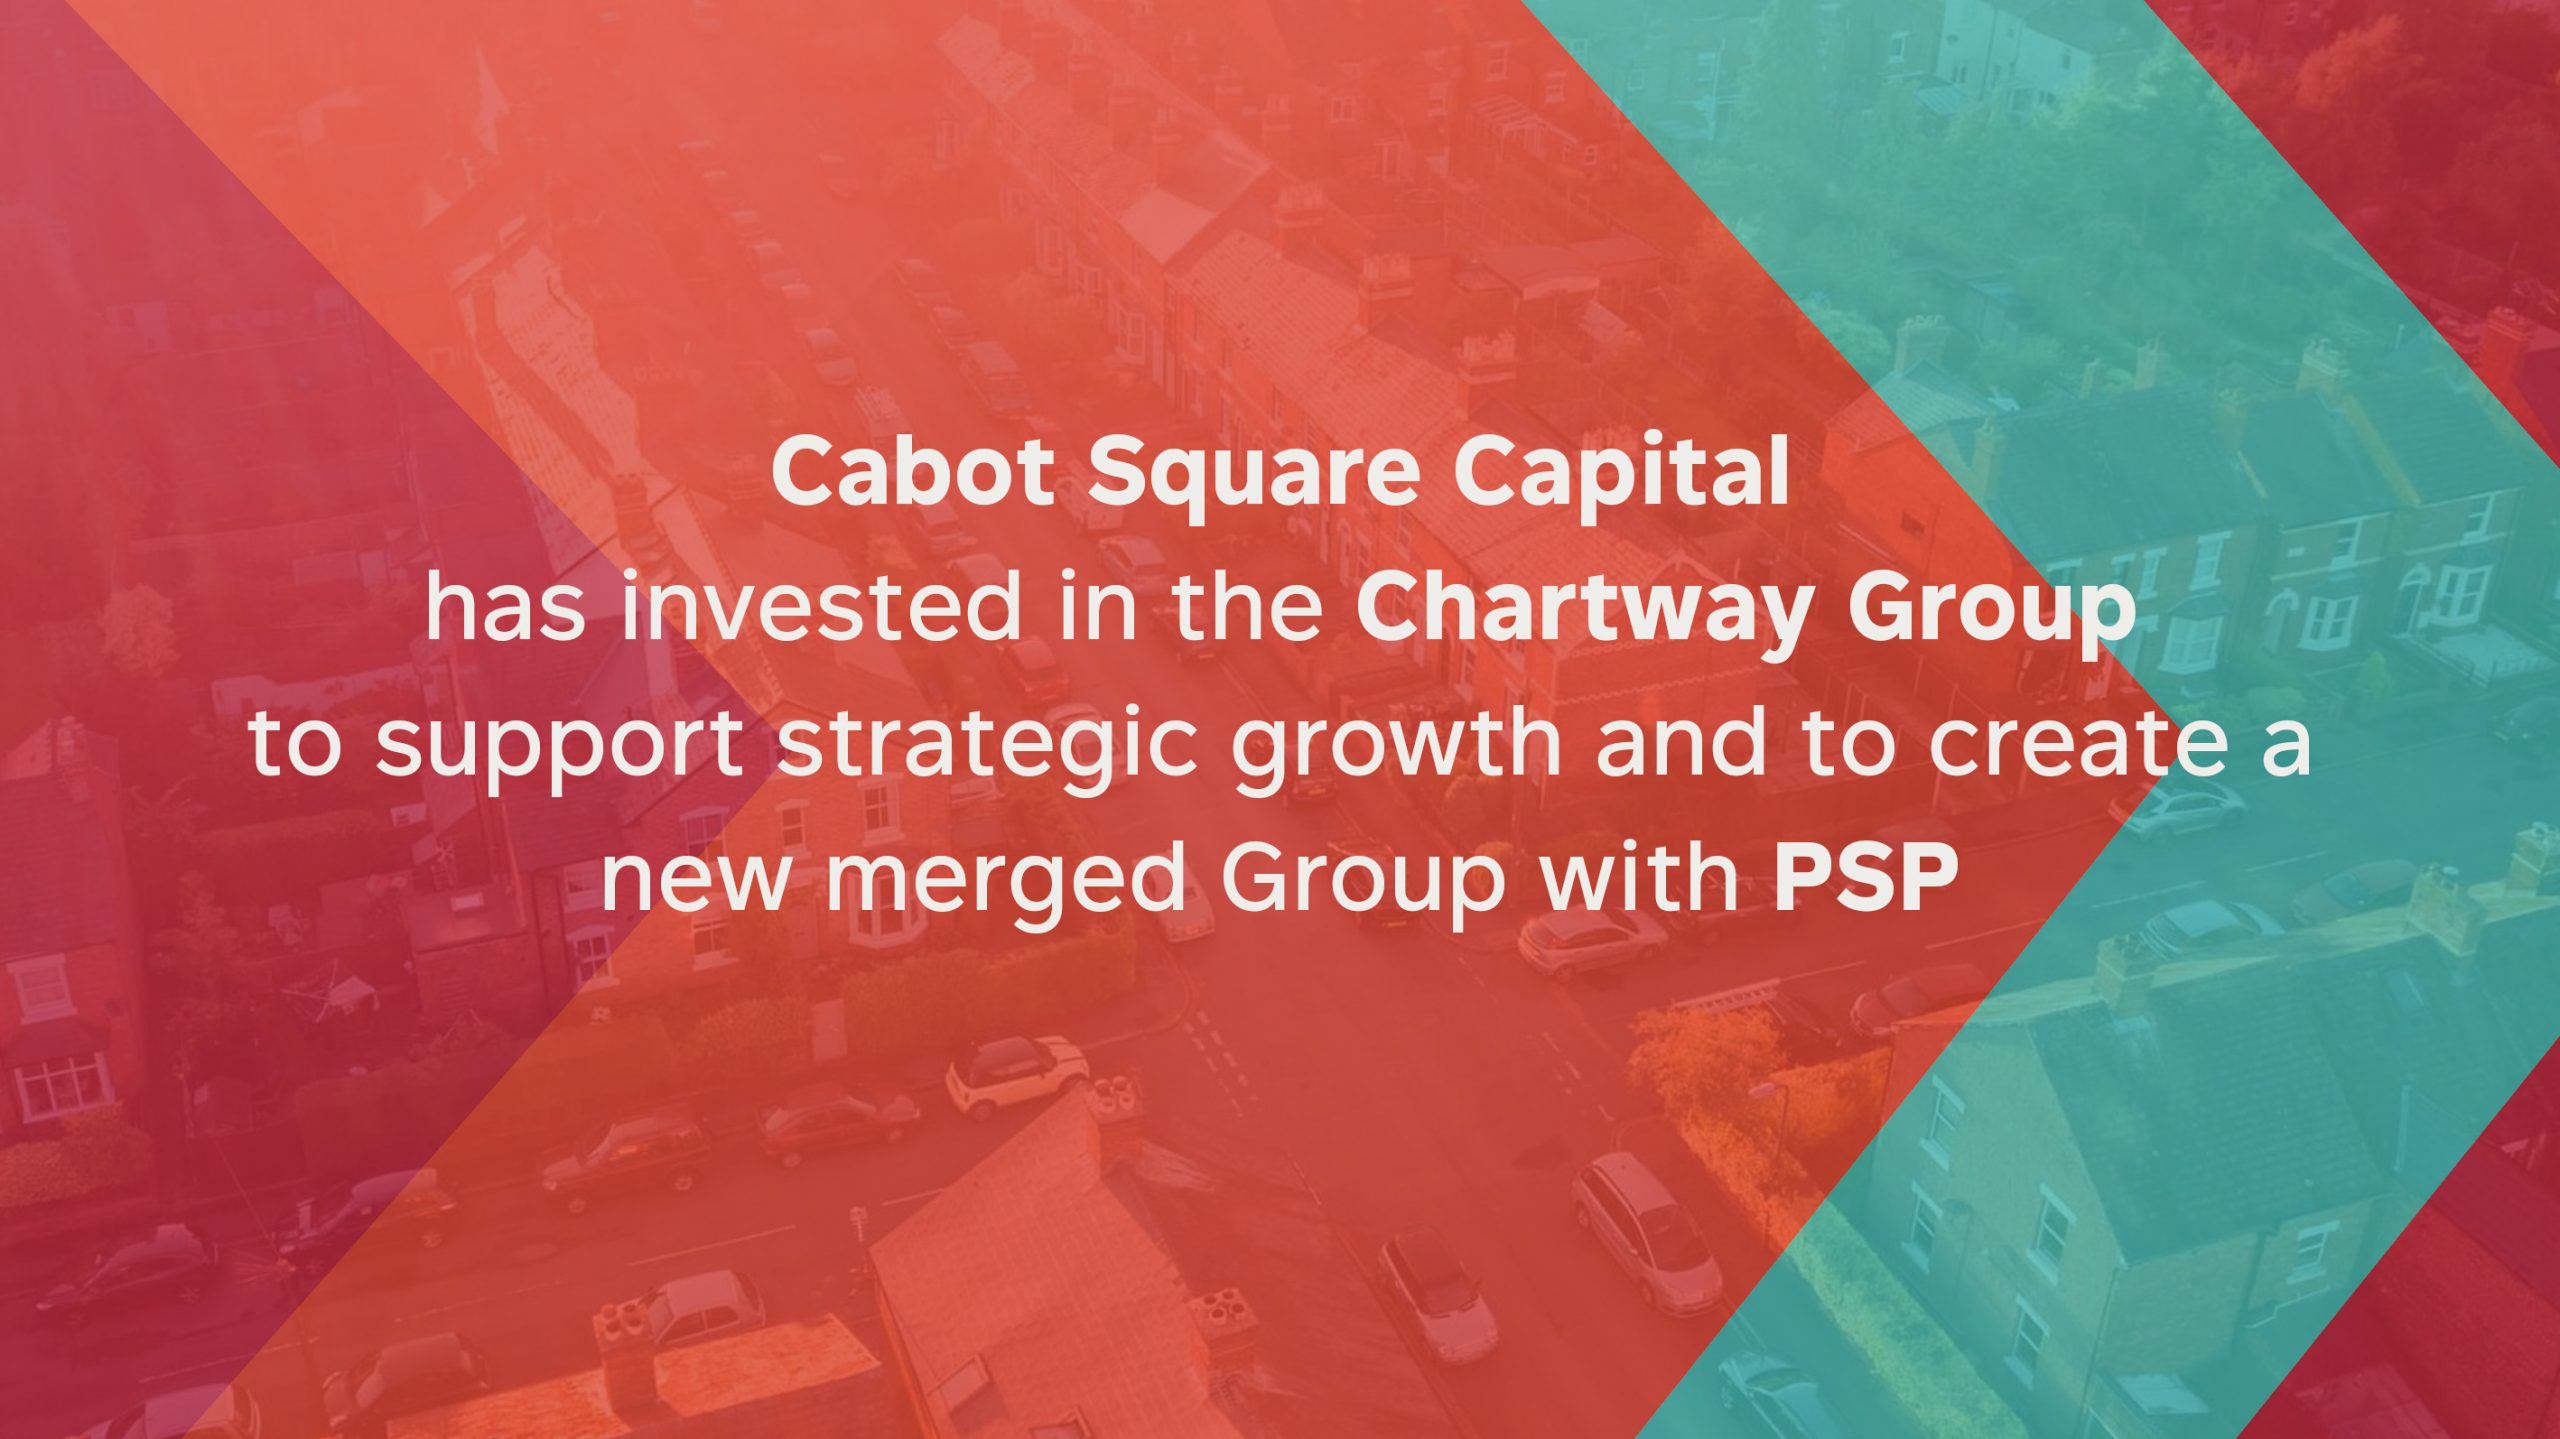 Cabot Square Capital acquires majority stake in Chartway Group